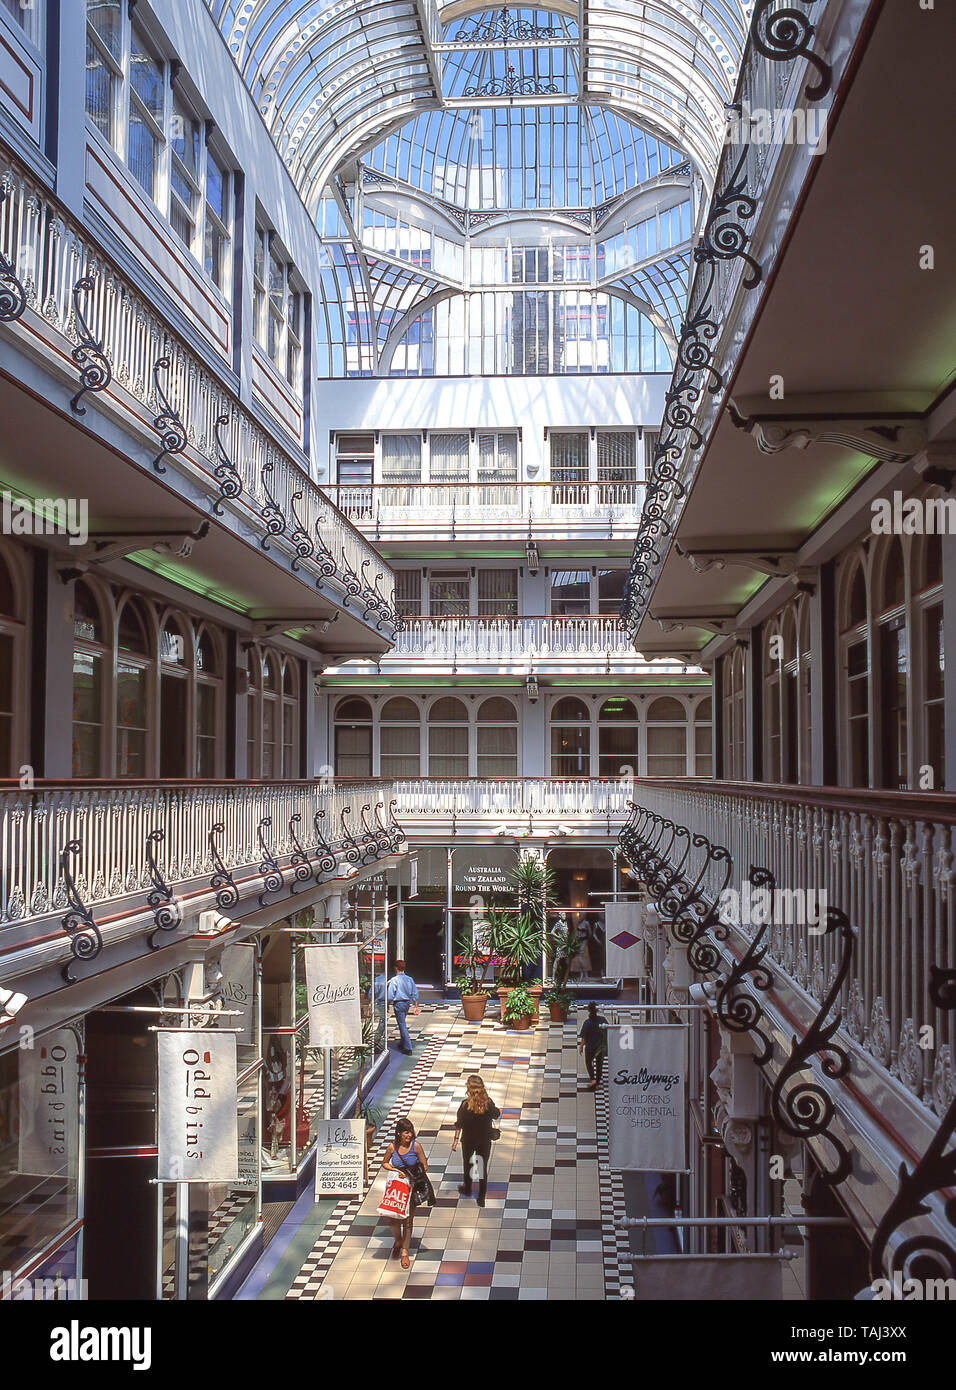 Interior of Victorian Barton Shopping Arcade, Deansgate, Manchester, Greater Manchester, England, United Kingdom Stock Photo